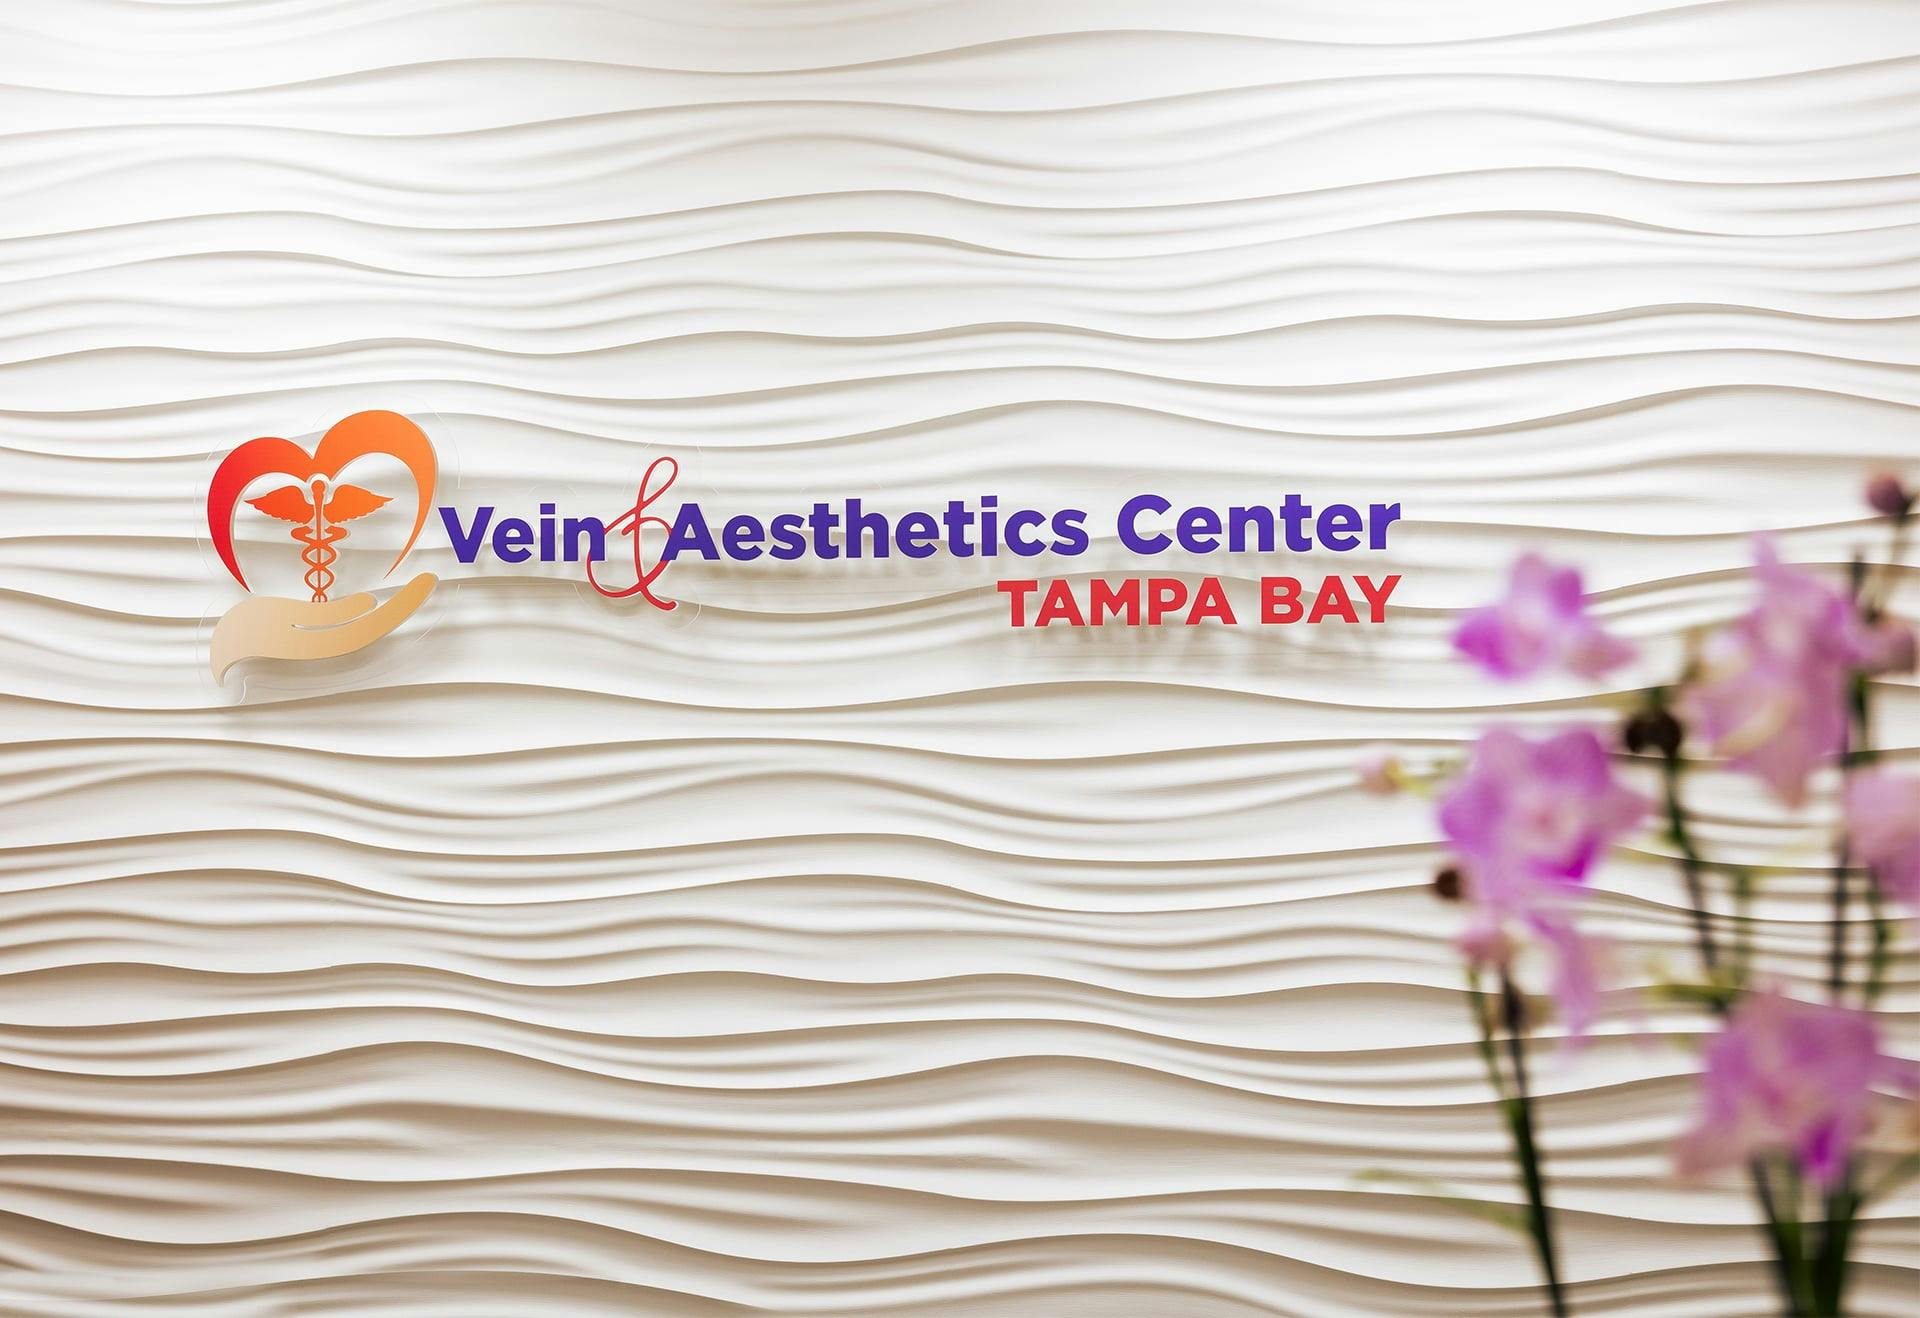 Vein & Aesthetics Center sign with flowers in front